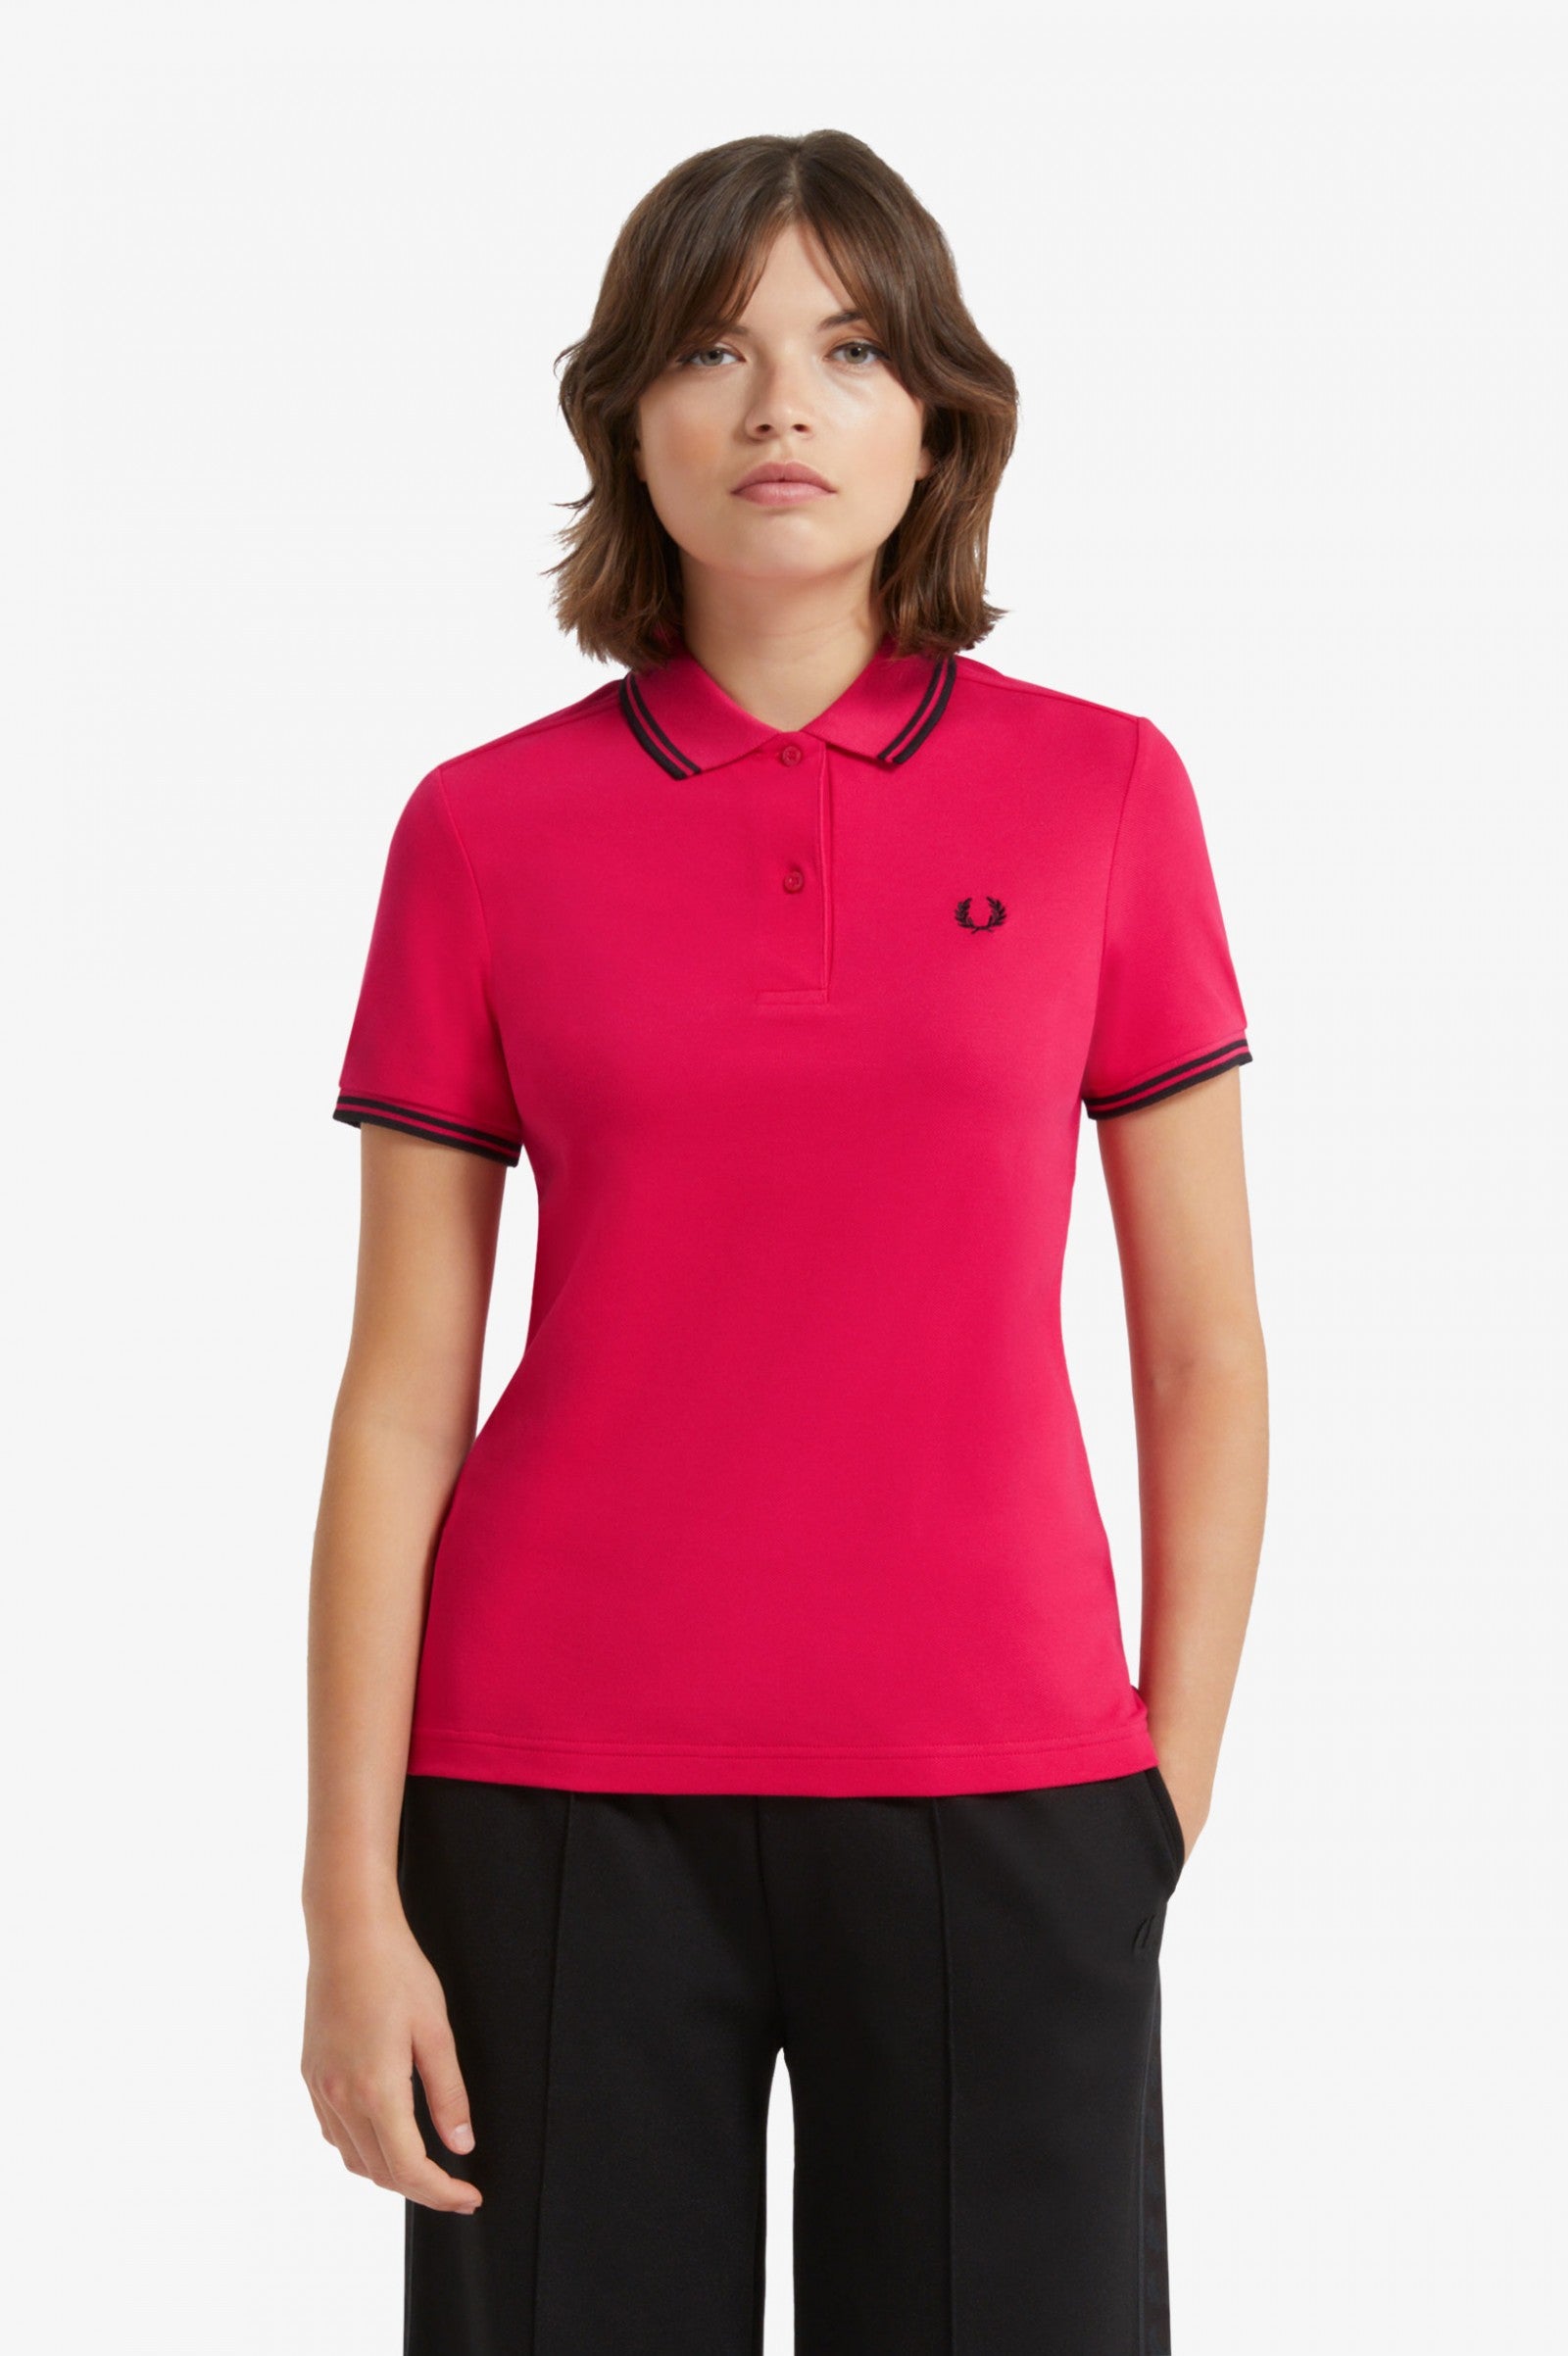 LADIES TWIN TIPPED FRED PERRY SHIRT (LOVE – Posers Hollywood